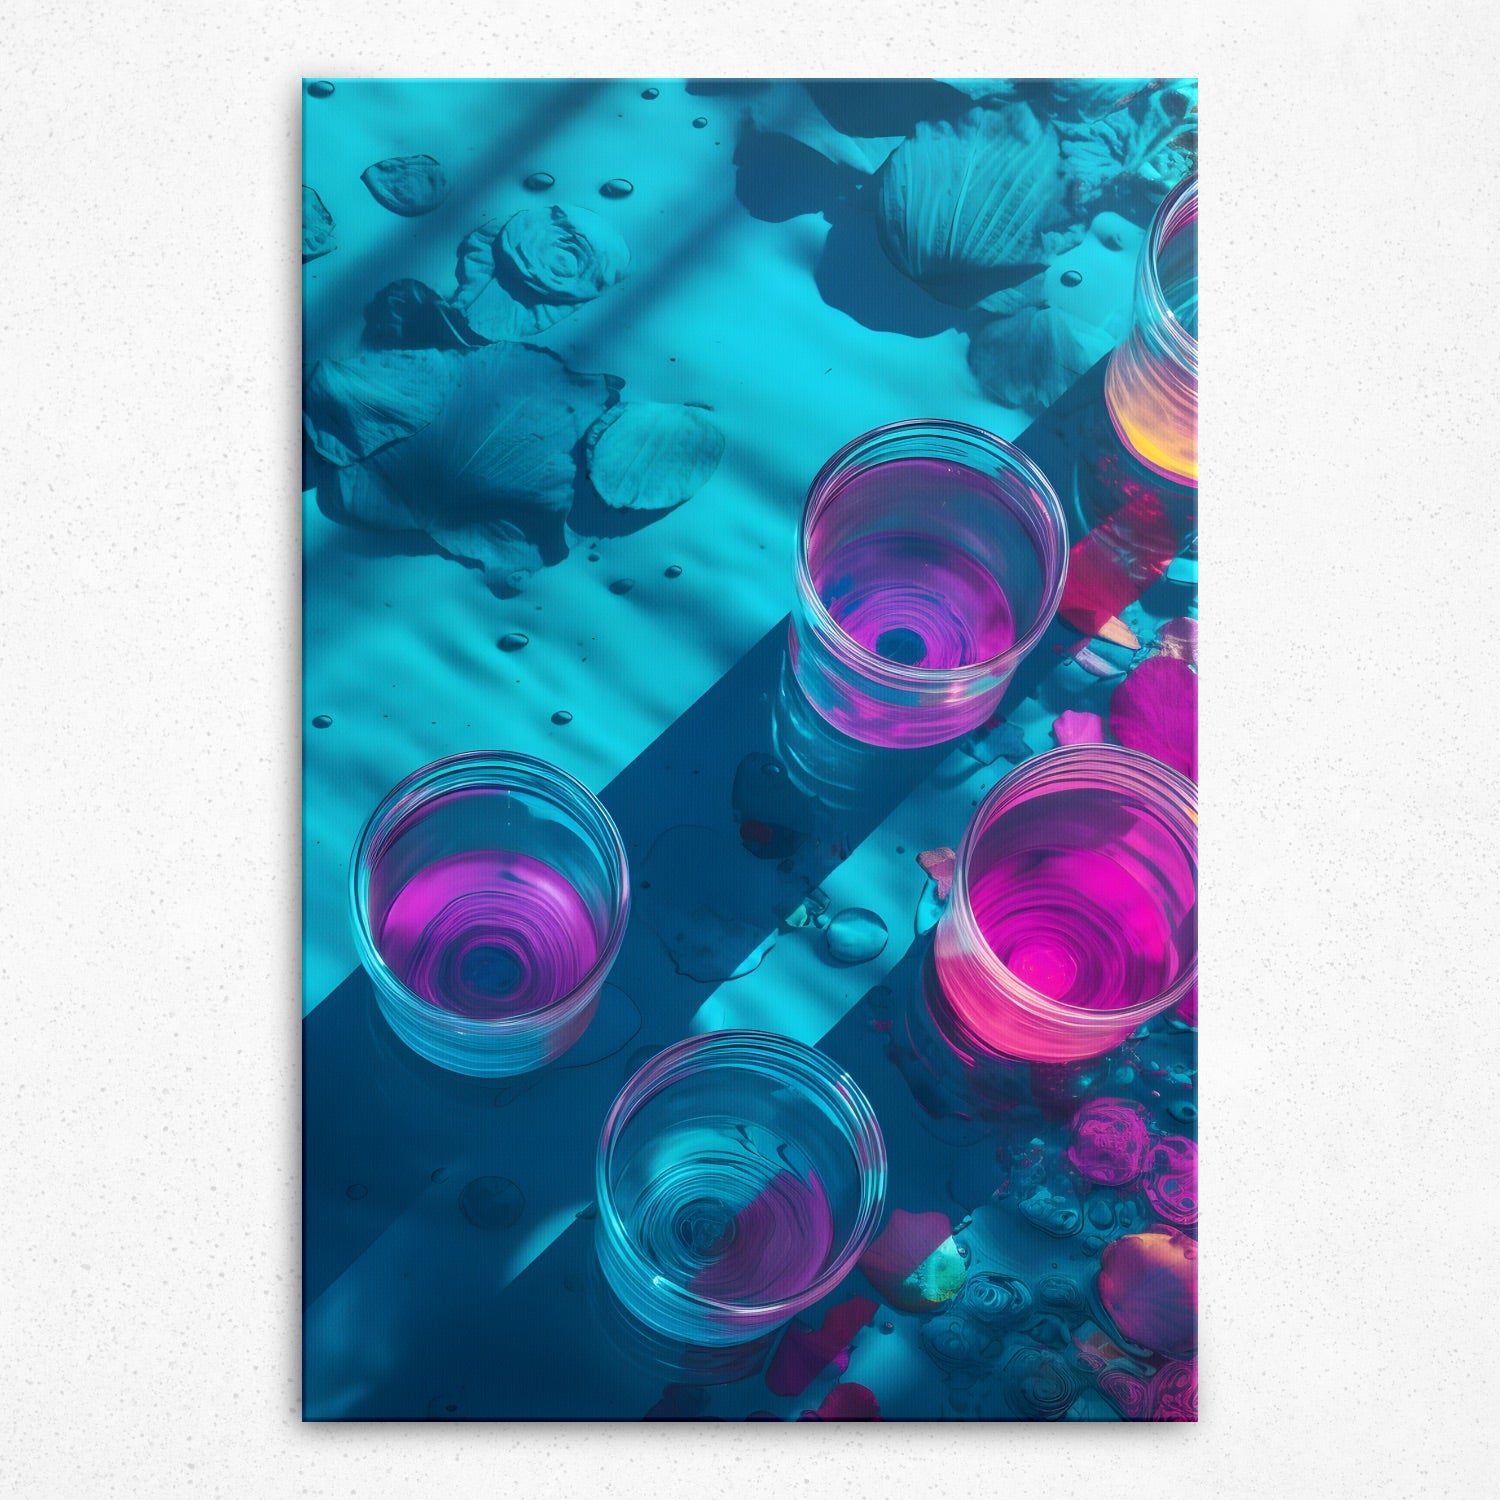 Neon Oasis (Poster)